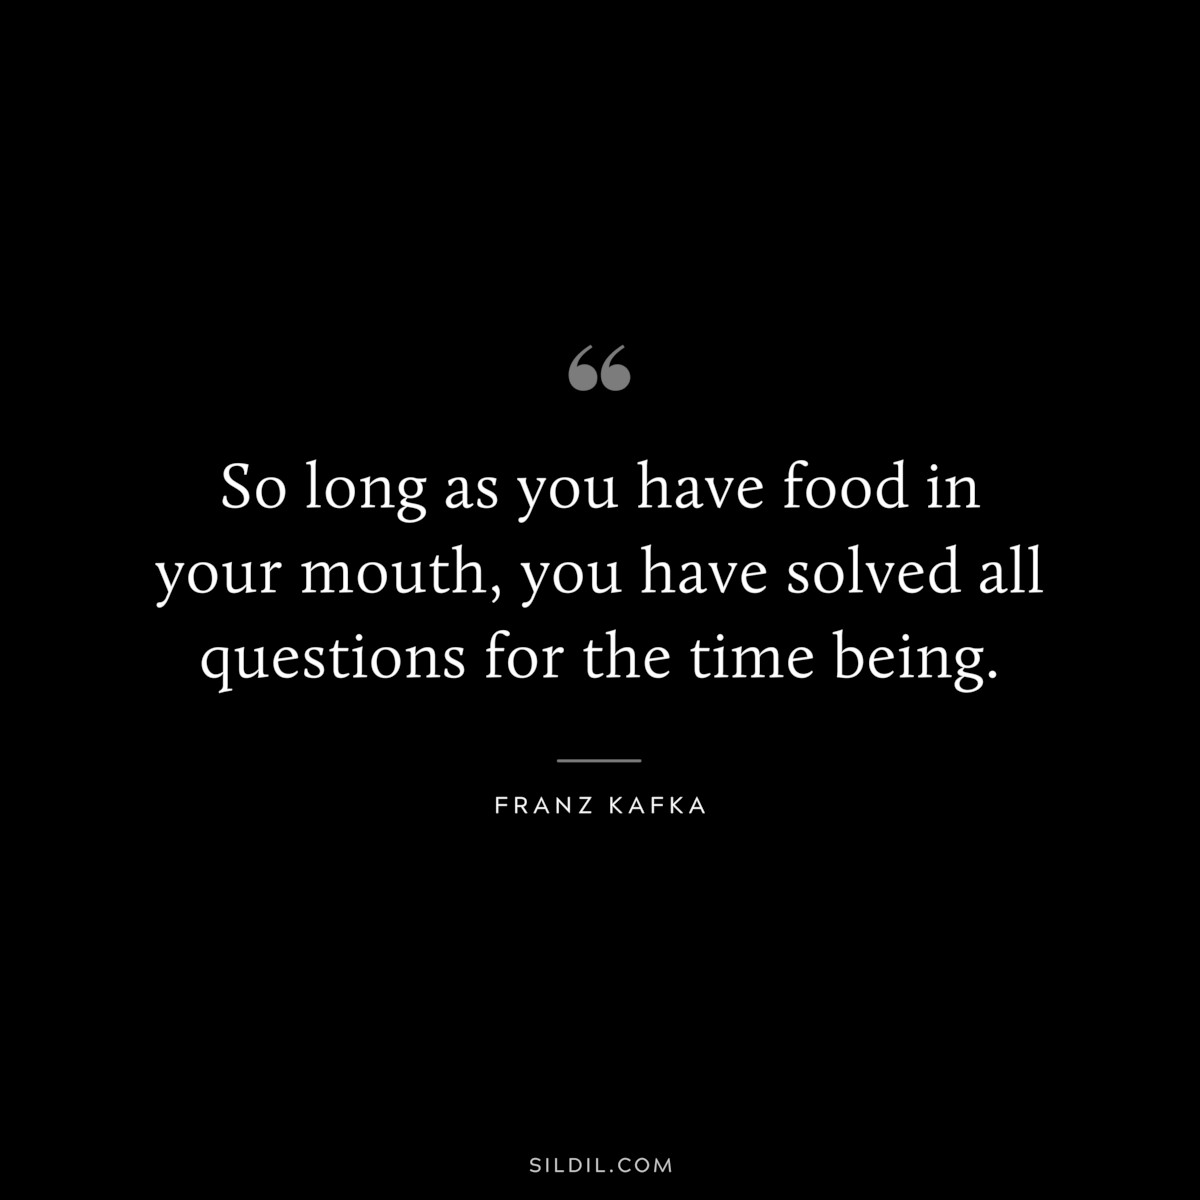 So long as you have food in your mouth, you have solved all questions for the time being. ― Franz Kafka